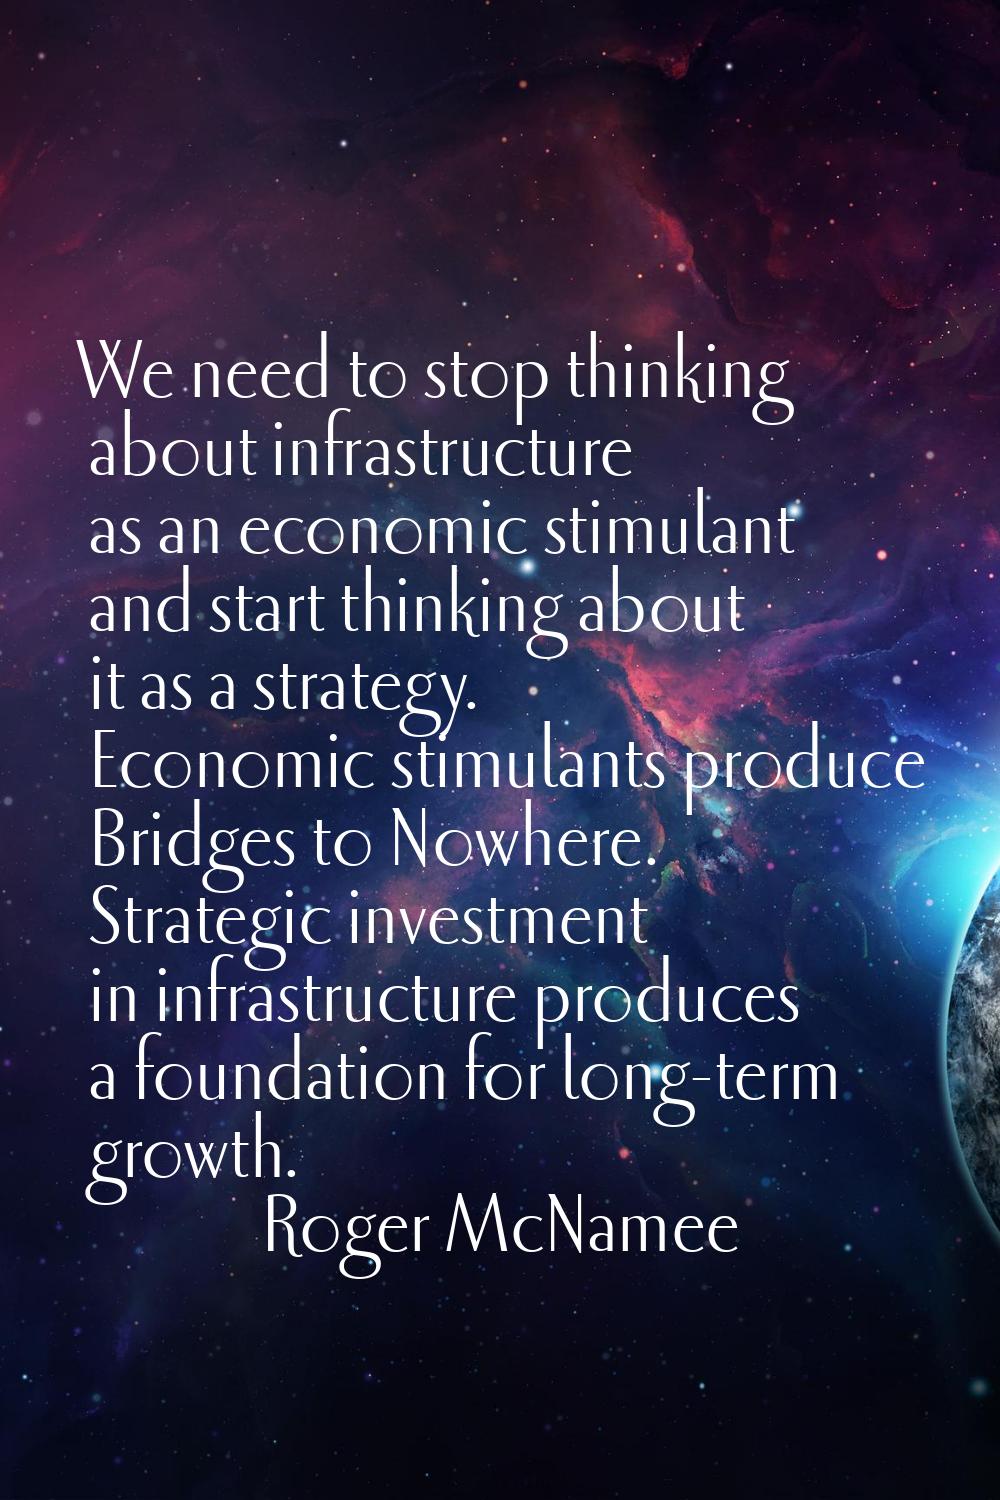 We need to stop thinking about infrastructure as an economic stimulant and start thinking about it 